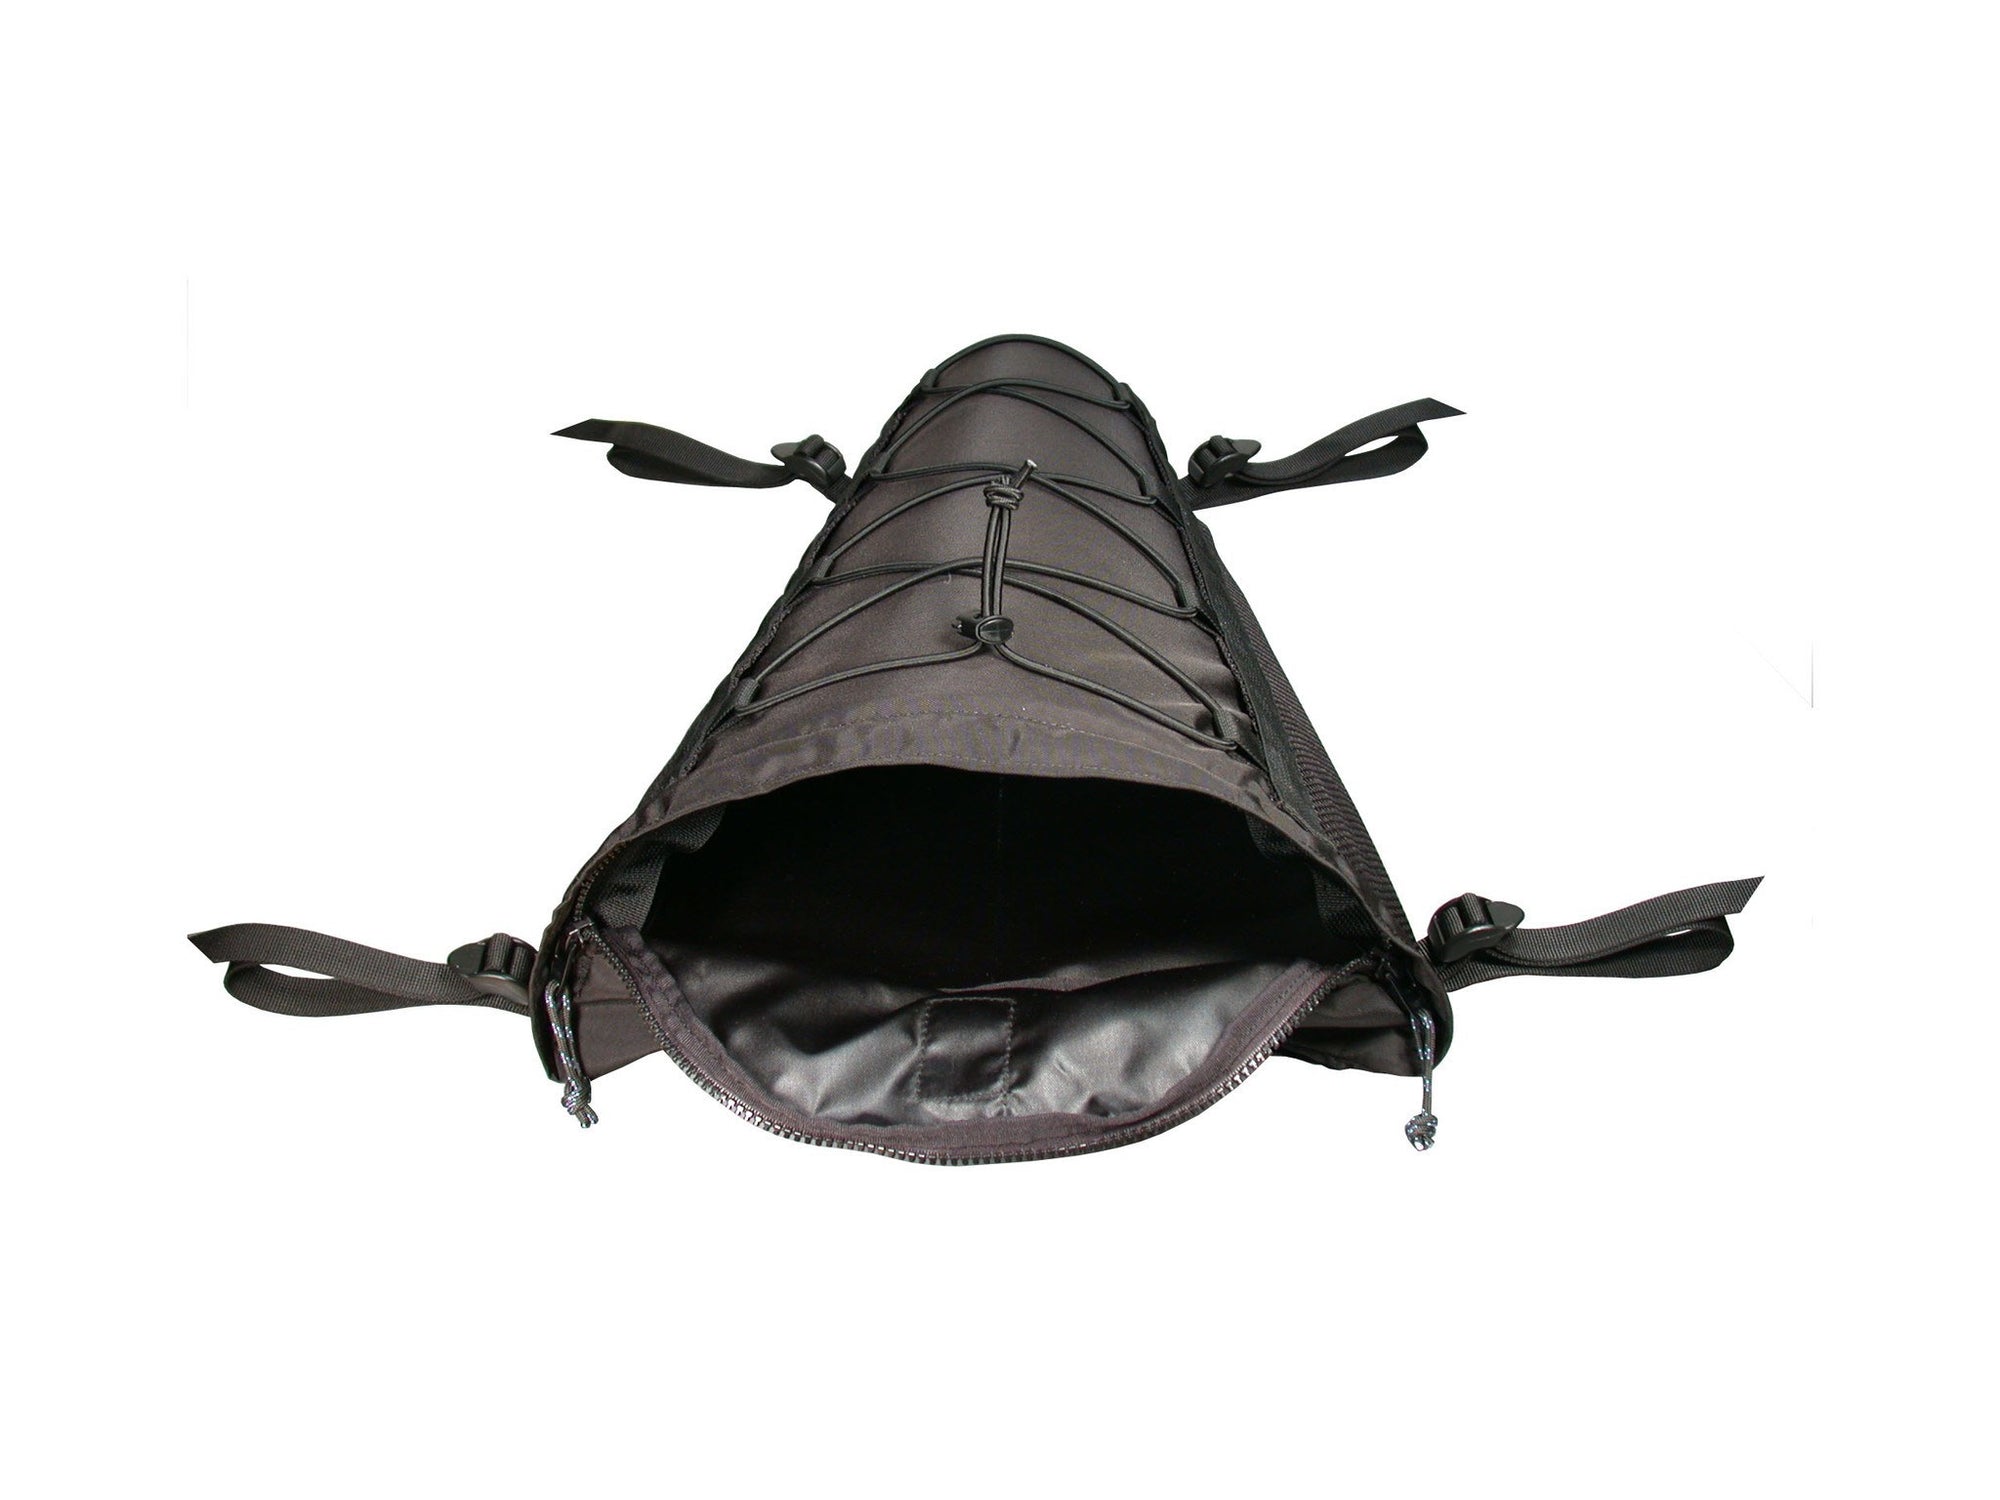 North Water Reflective Peaked Deck Bag